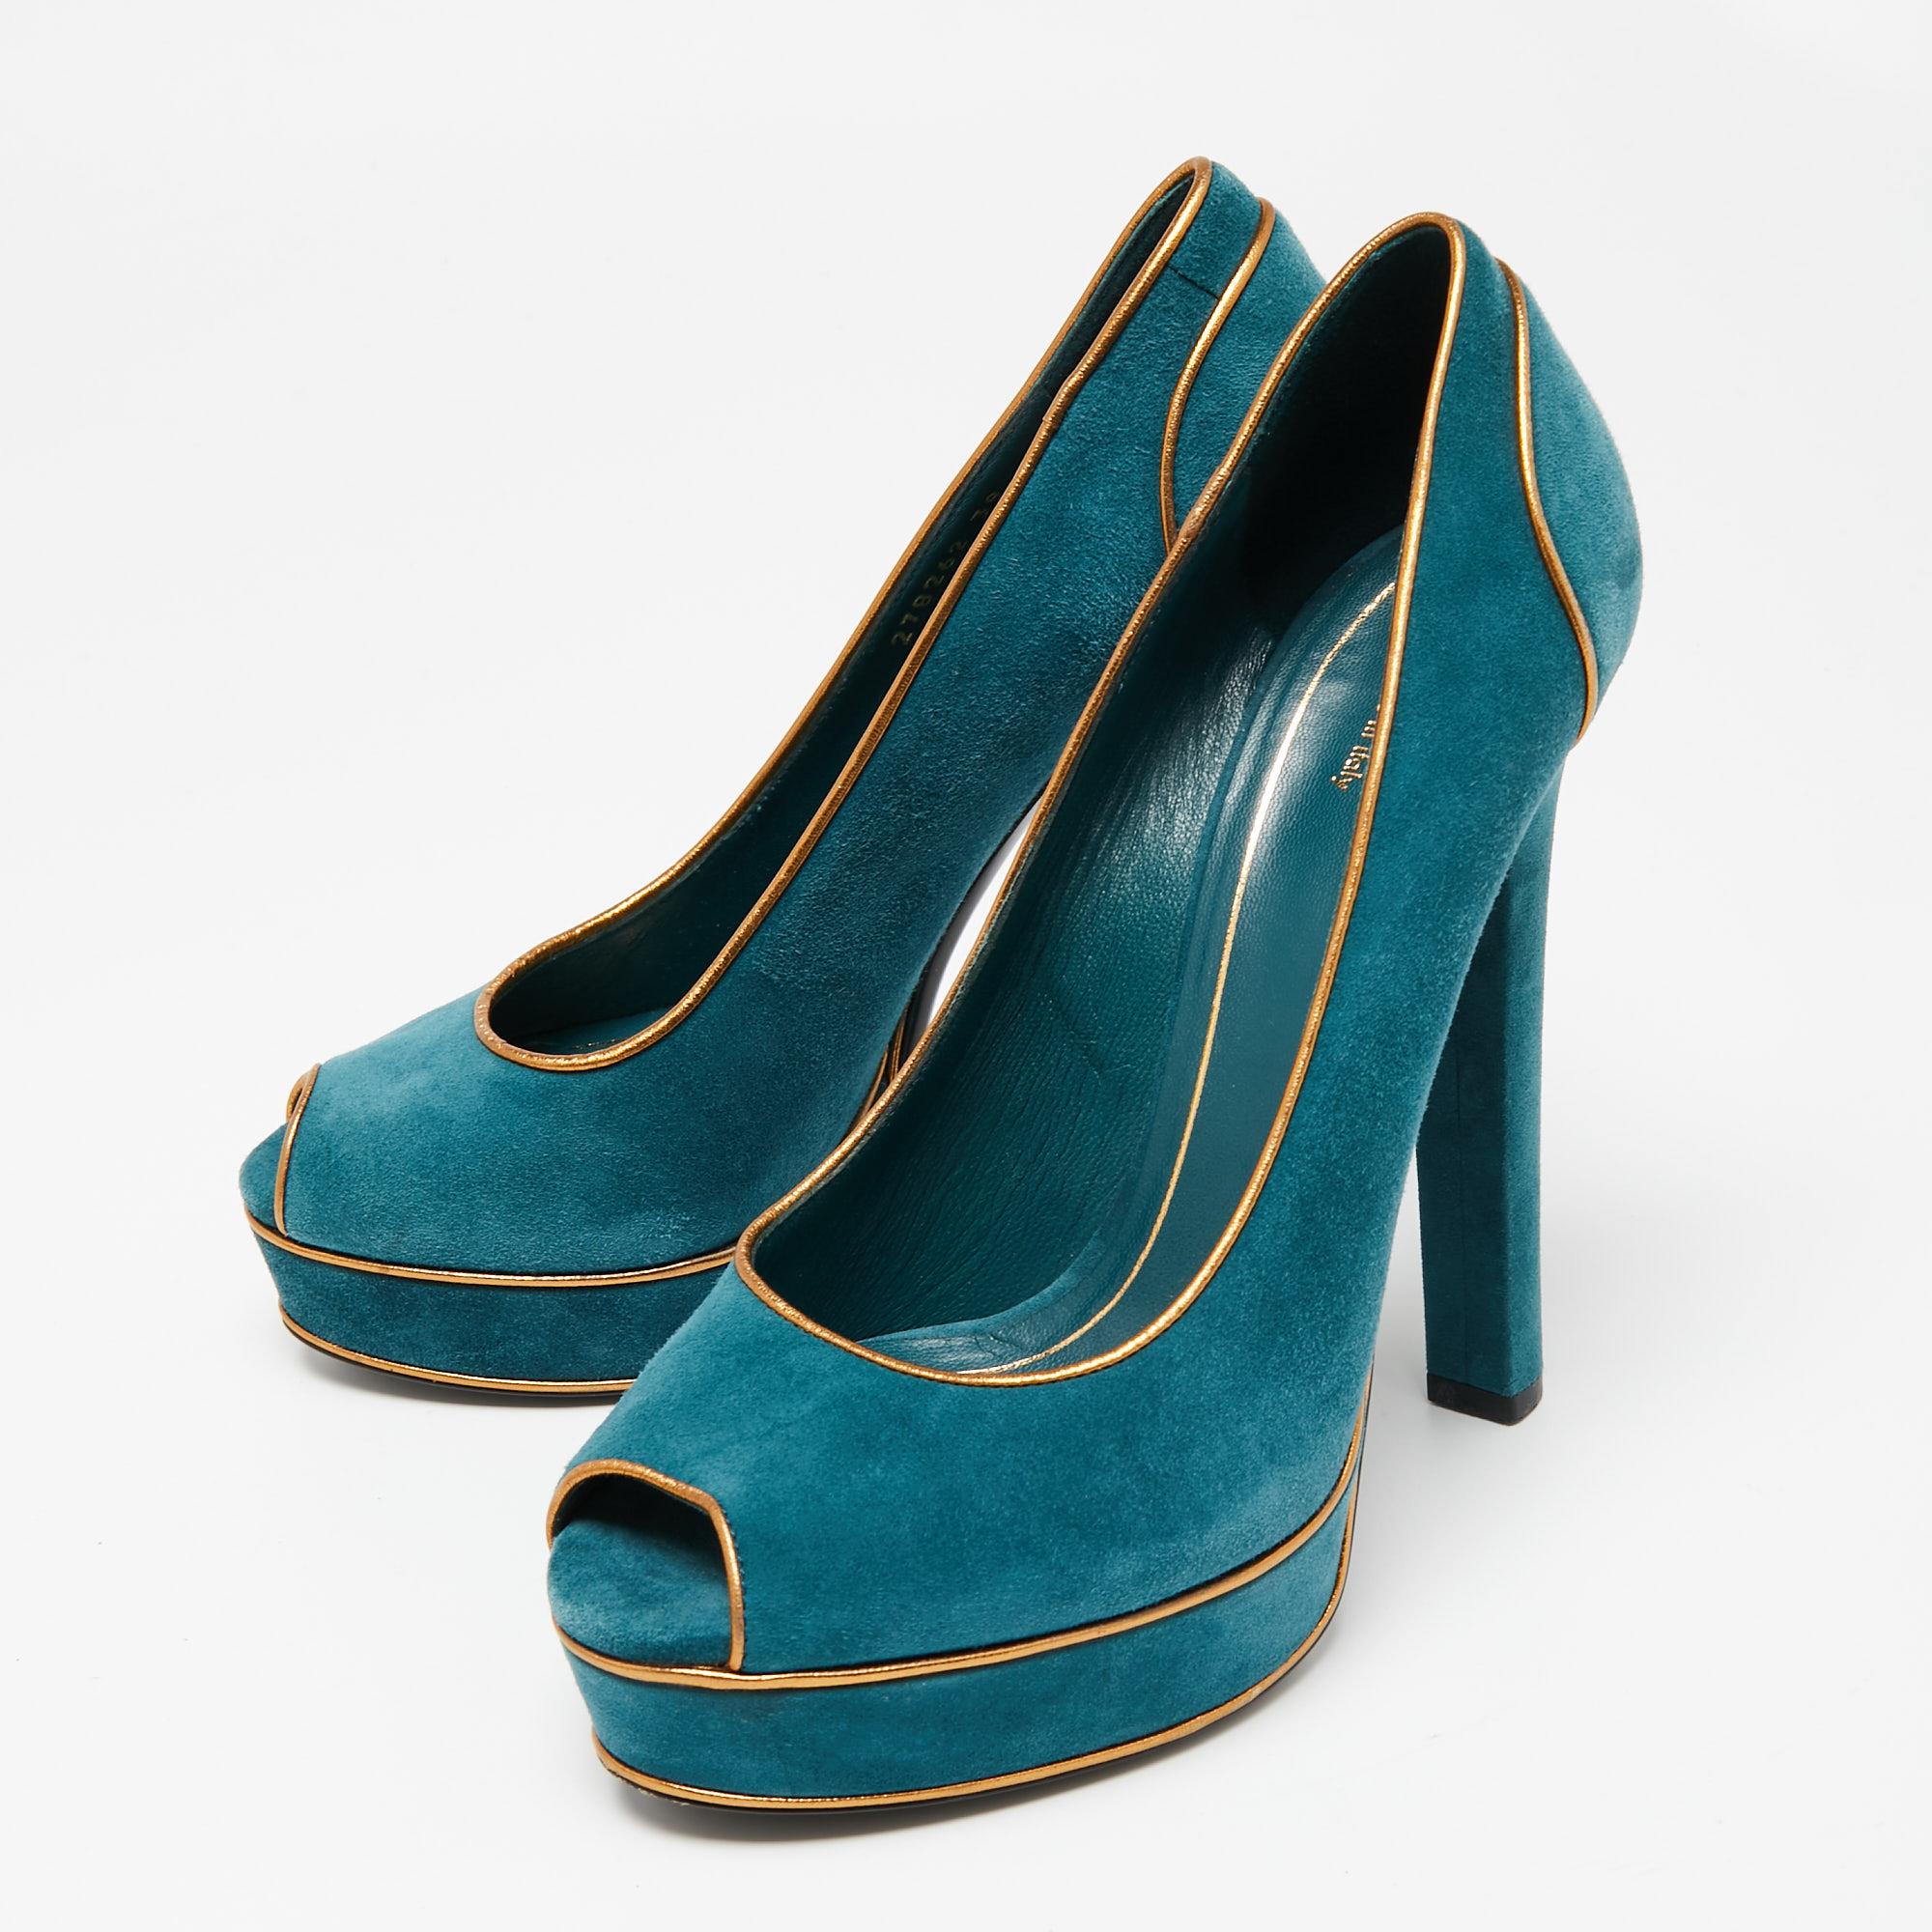 Brimming with unparalleled sophistication, this pair of pumps from Gucci are ready to help you look your best. Rendered in luxurious teal green suede with gold leather piping and flaunting a peep-toe silhouette, these shoes offer comfort with their